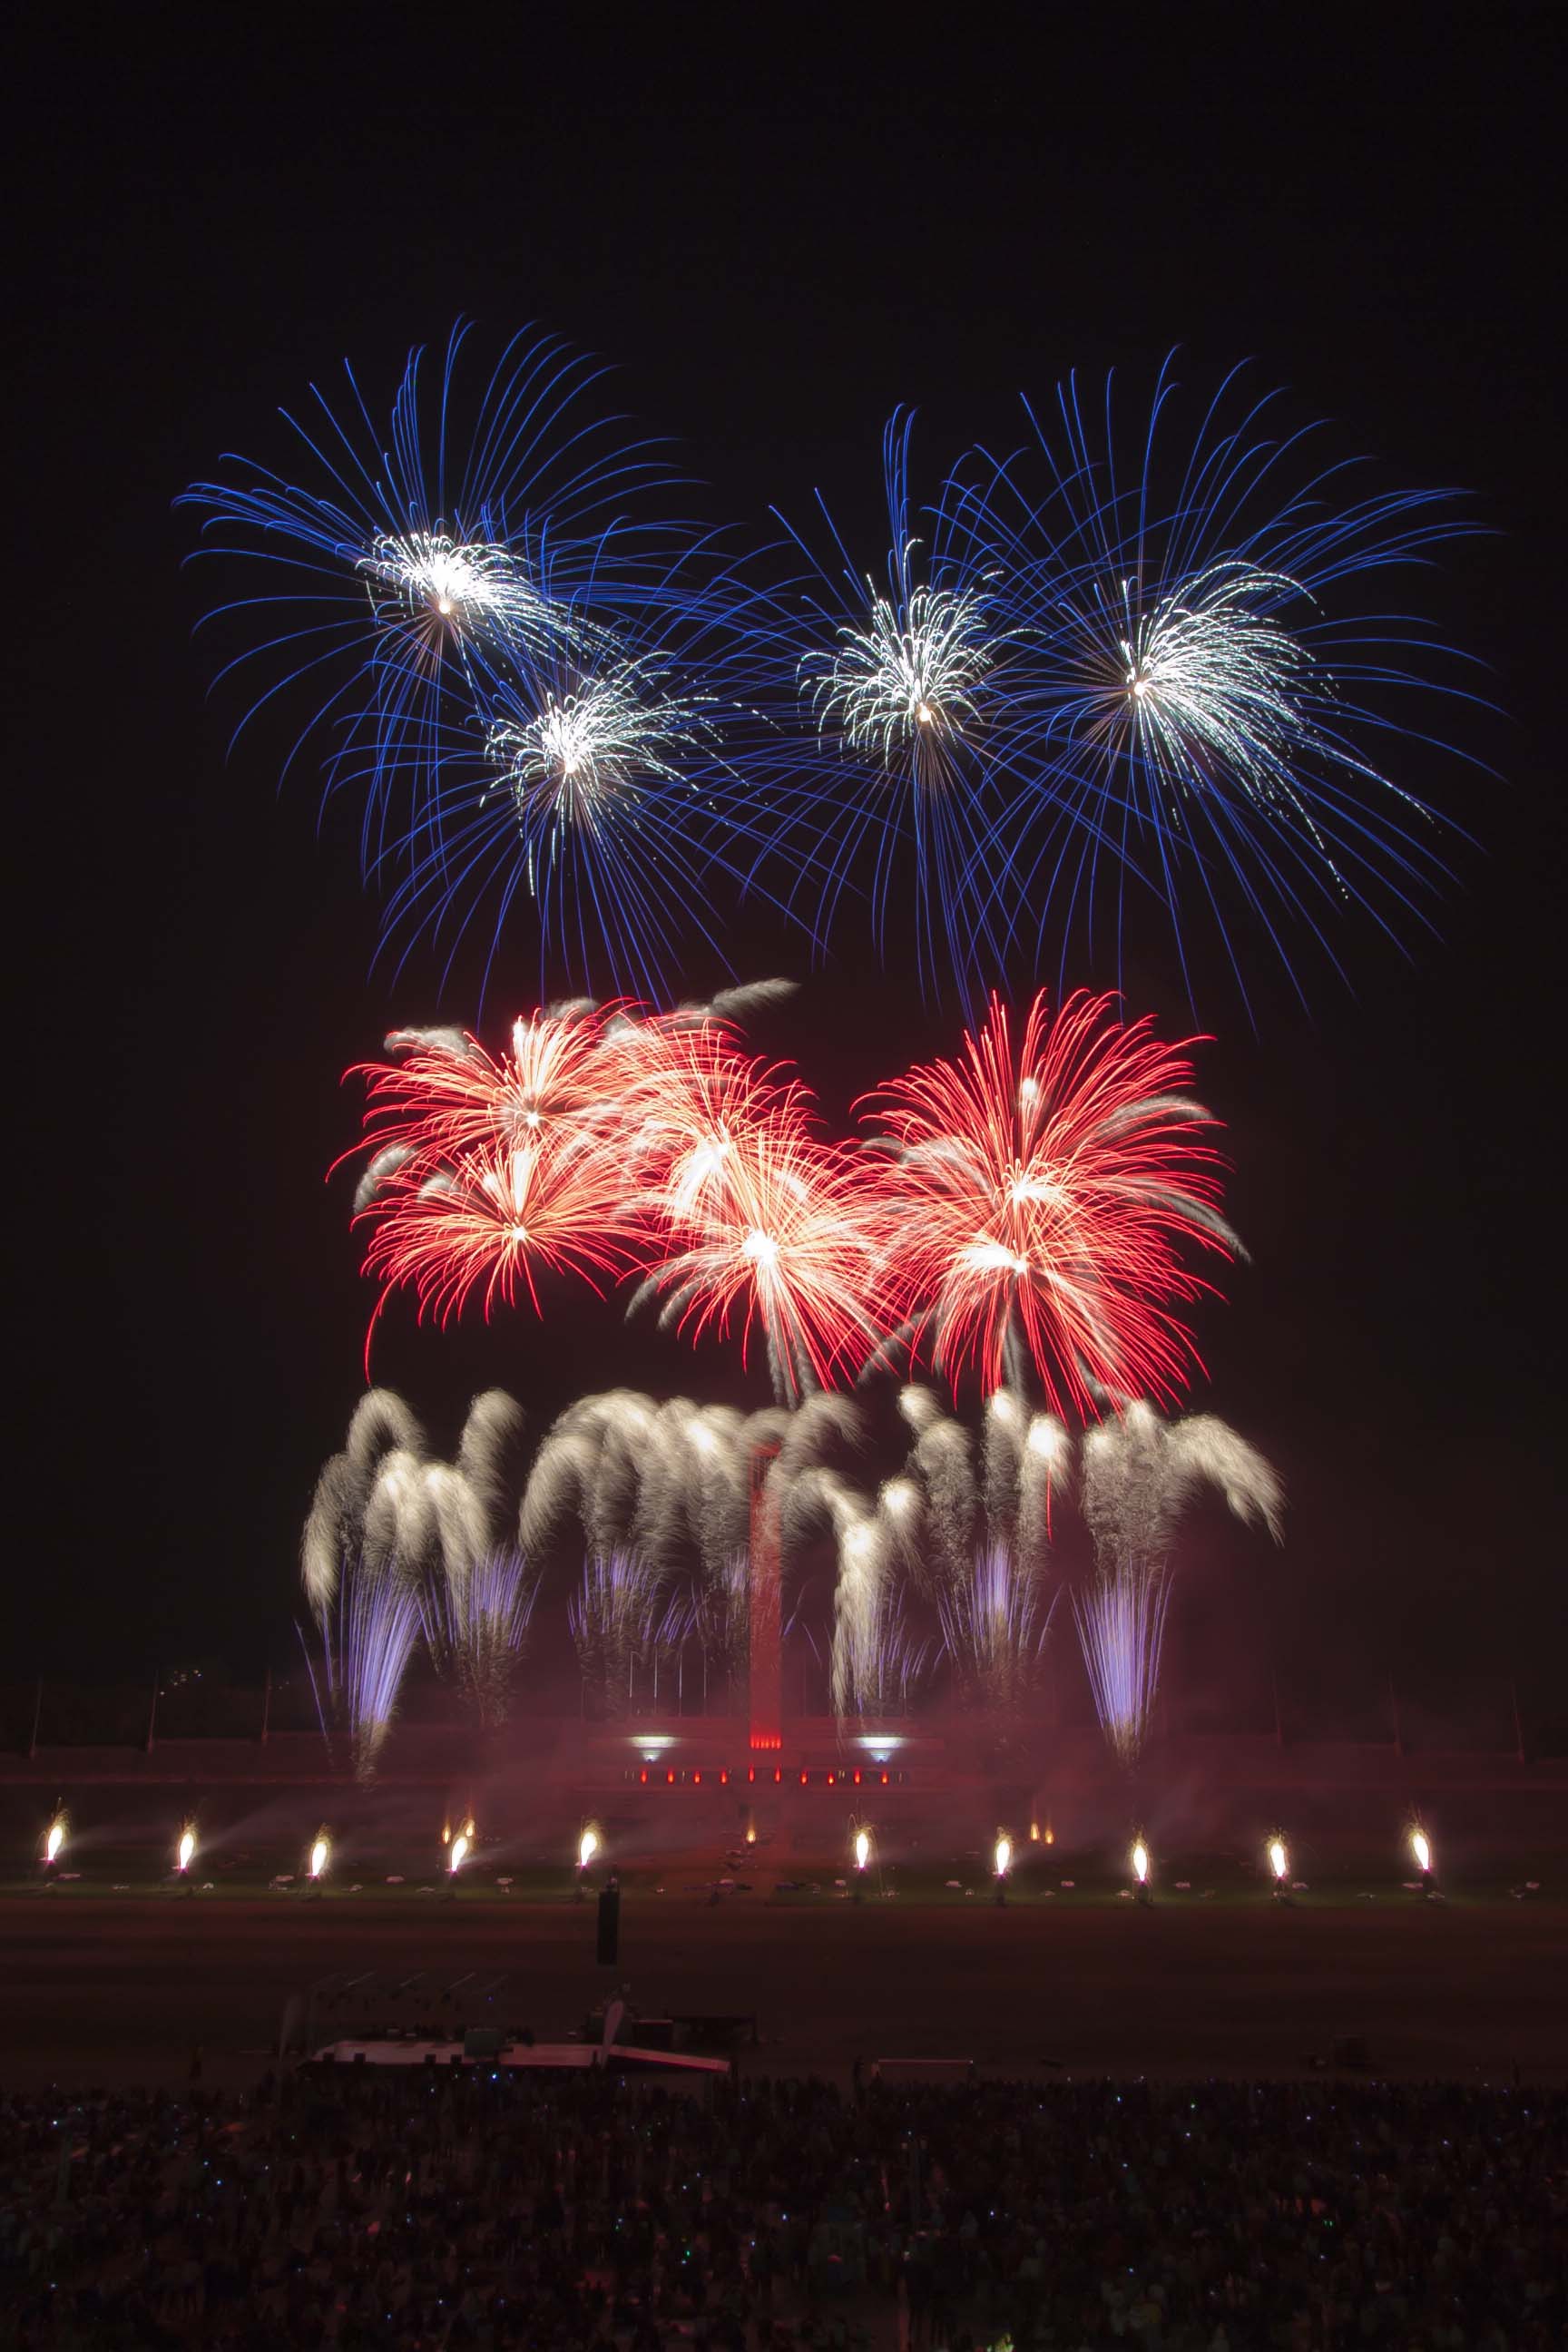 International fireworks competitions